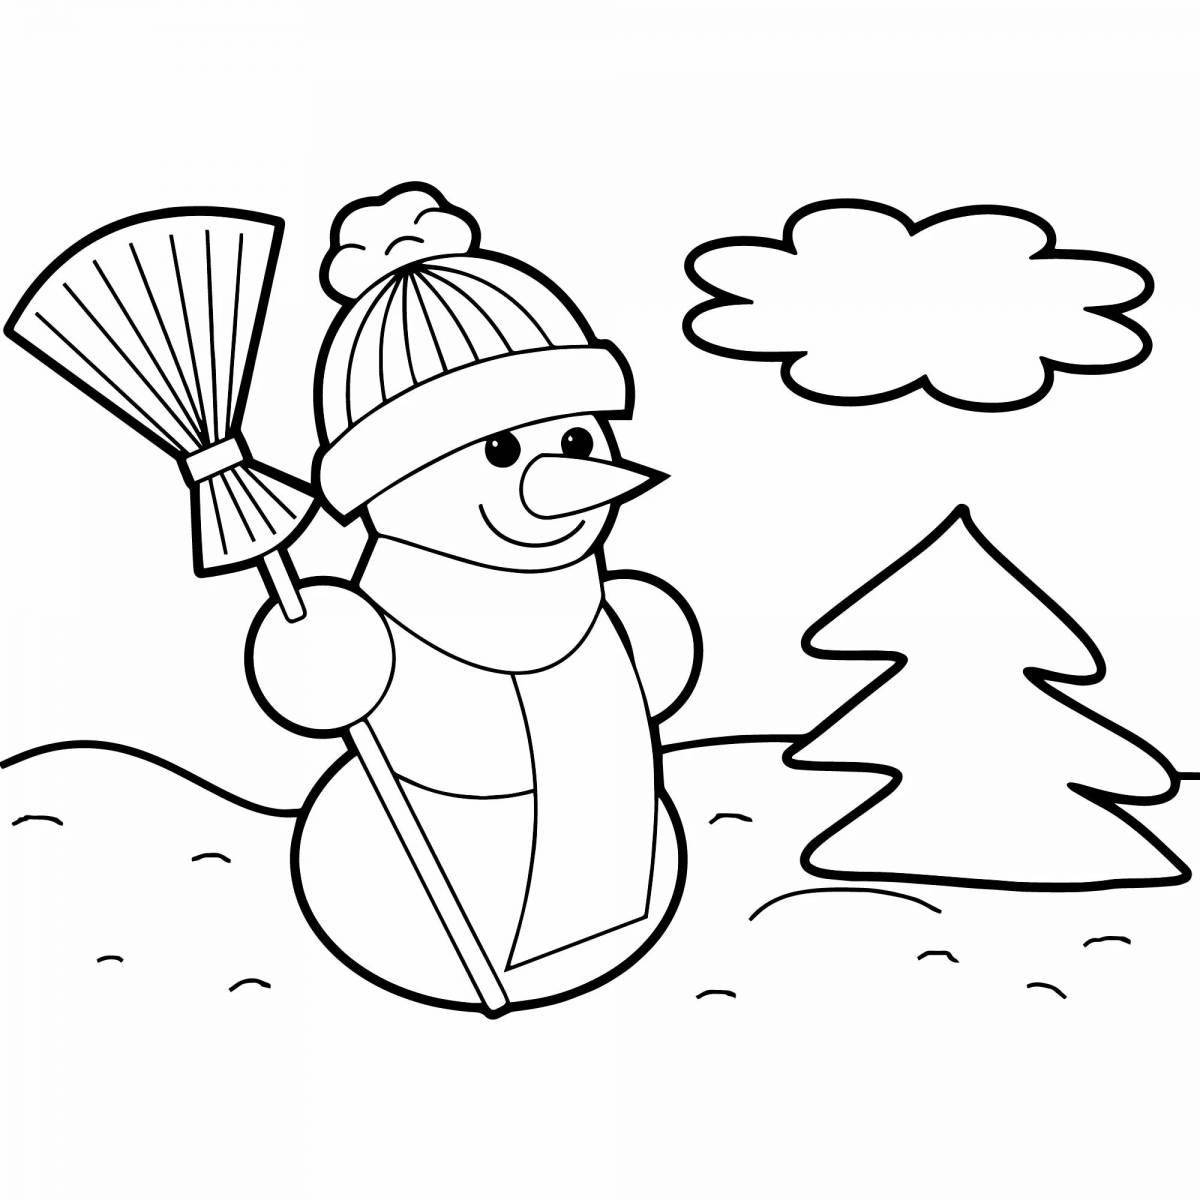 Live winter coloring for kids 2 3